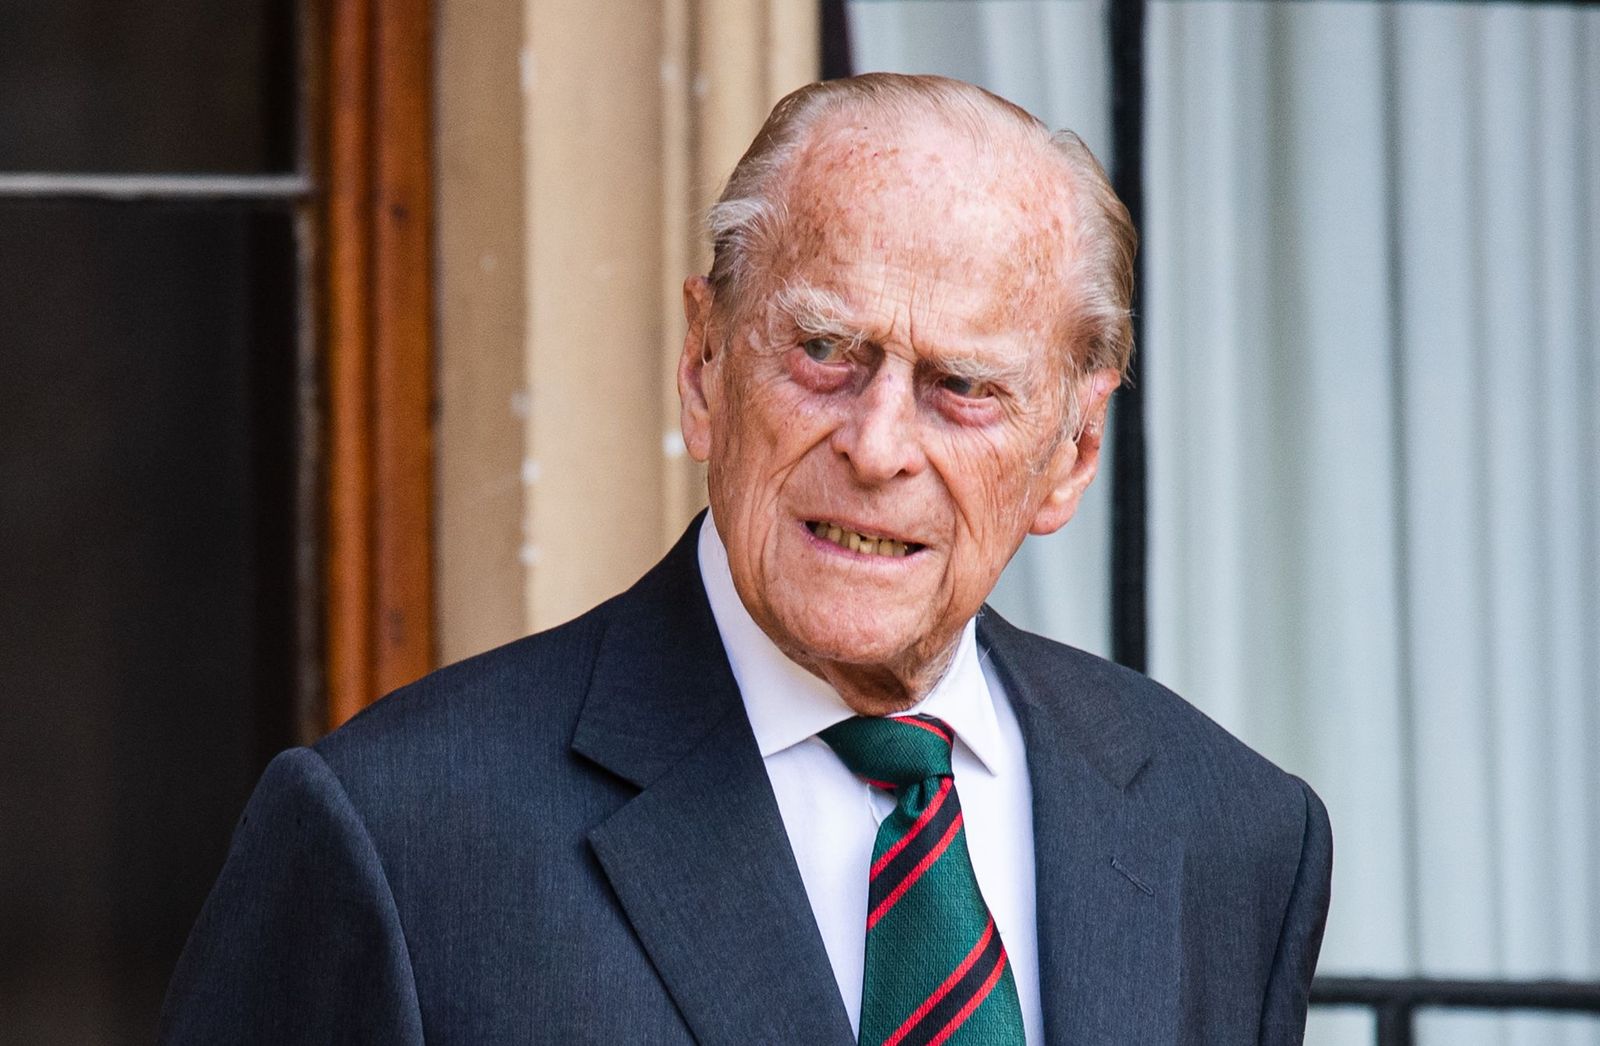 Prince Philip at the transfer of the Colonel-in-Chief of The Rifles at Windsor Castle on July 22, 2020 in Windsor, England. | Getty Images